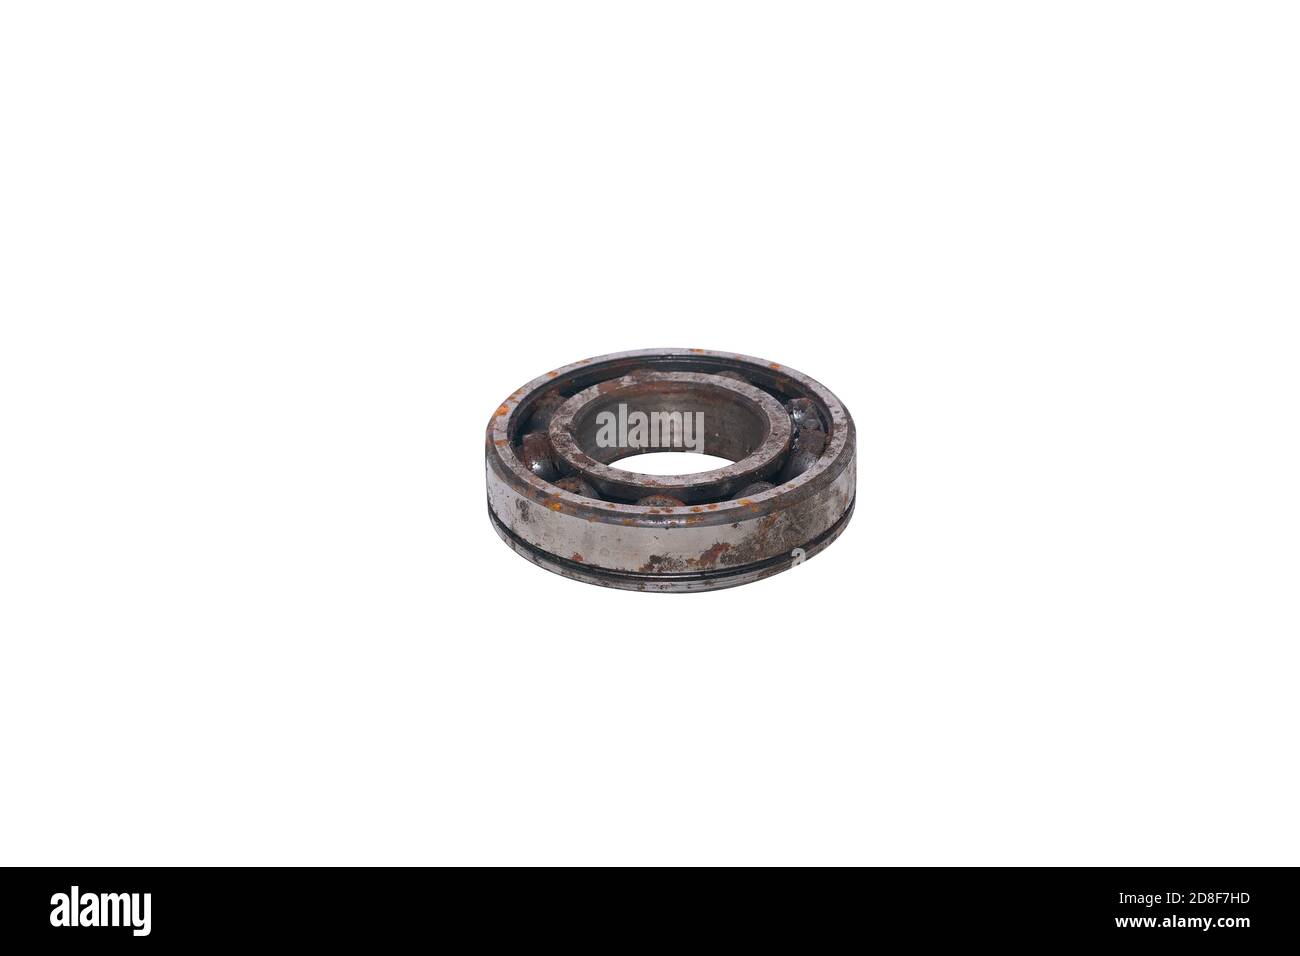 Old rusty bearing kit on a white background.Abandoned car part Stock Photo